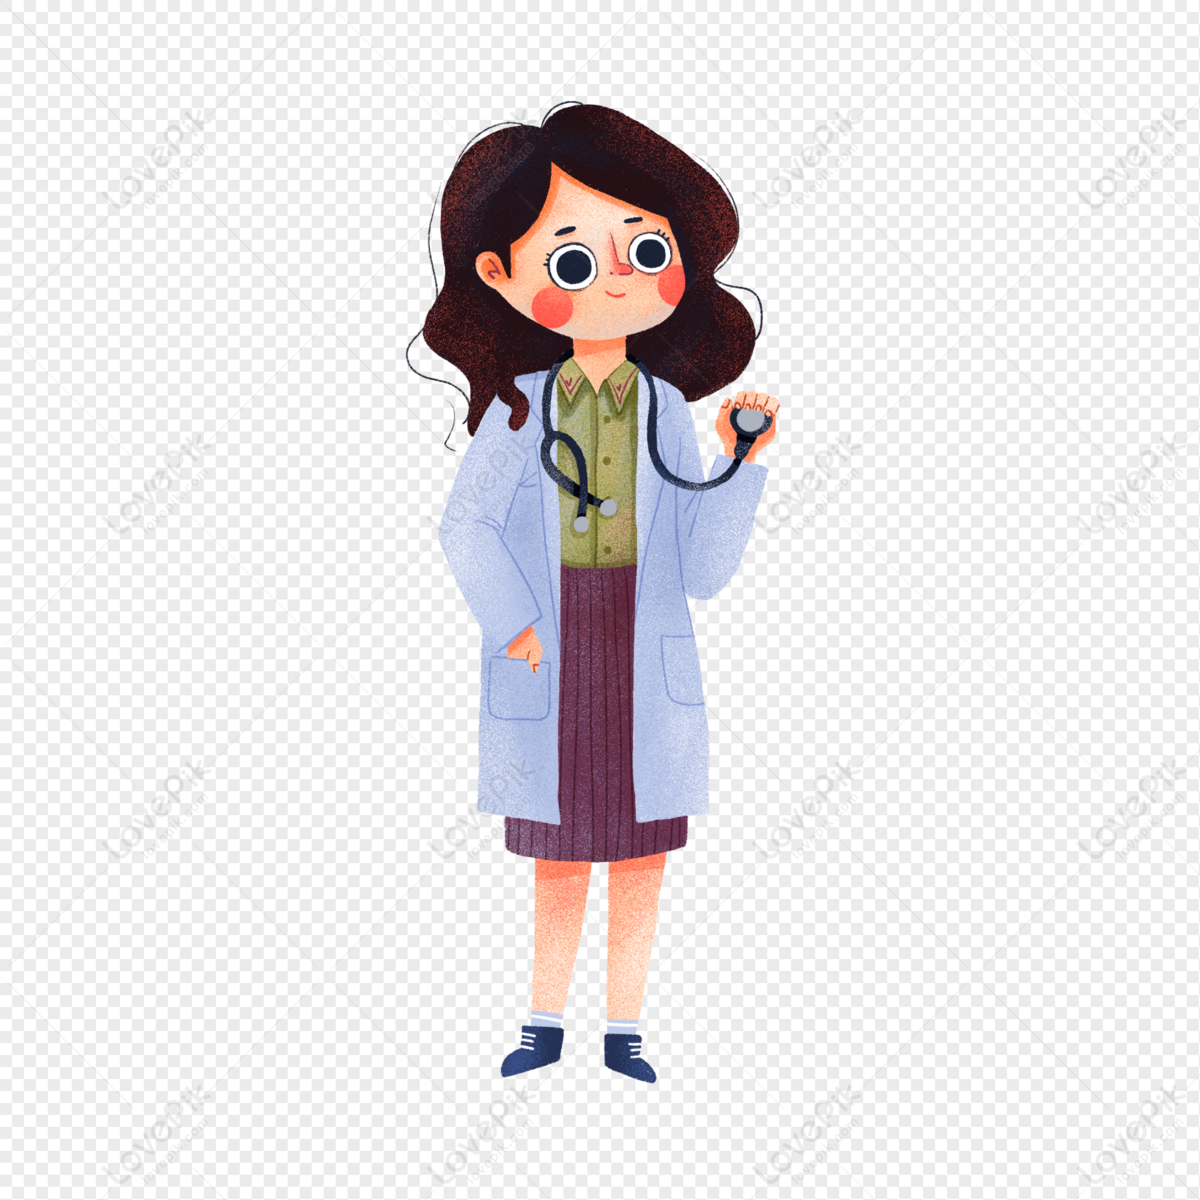 Female Doctor Holding A Stethoscope PNG Transparent Background And Clipart  Image For Free Download - Lovepik | 401563180